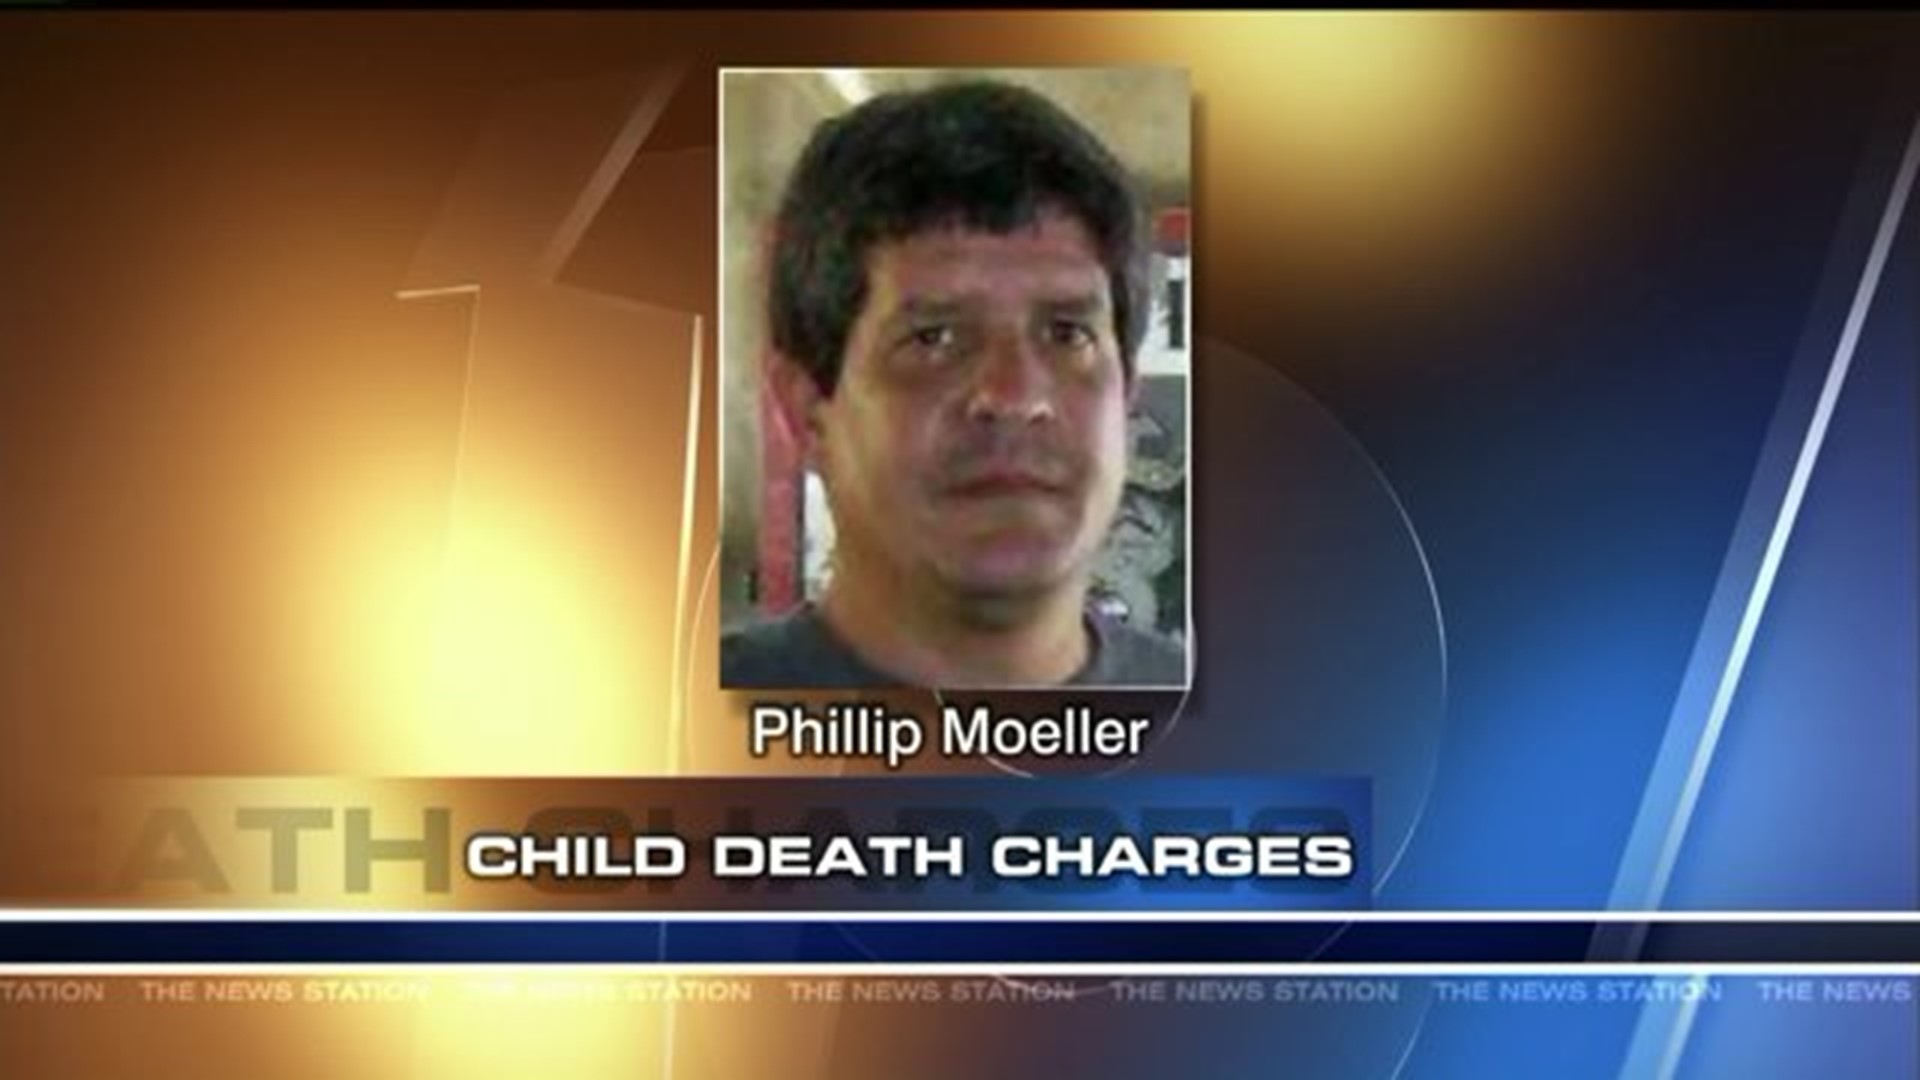 Man Charged with Death of 4-Year-Old Boy